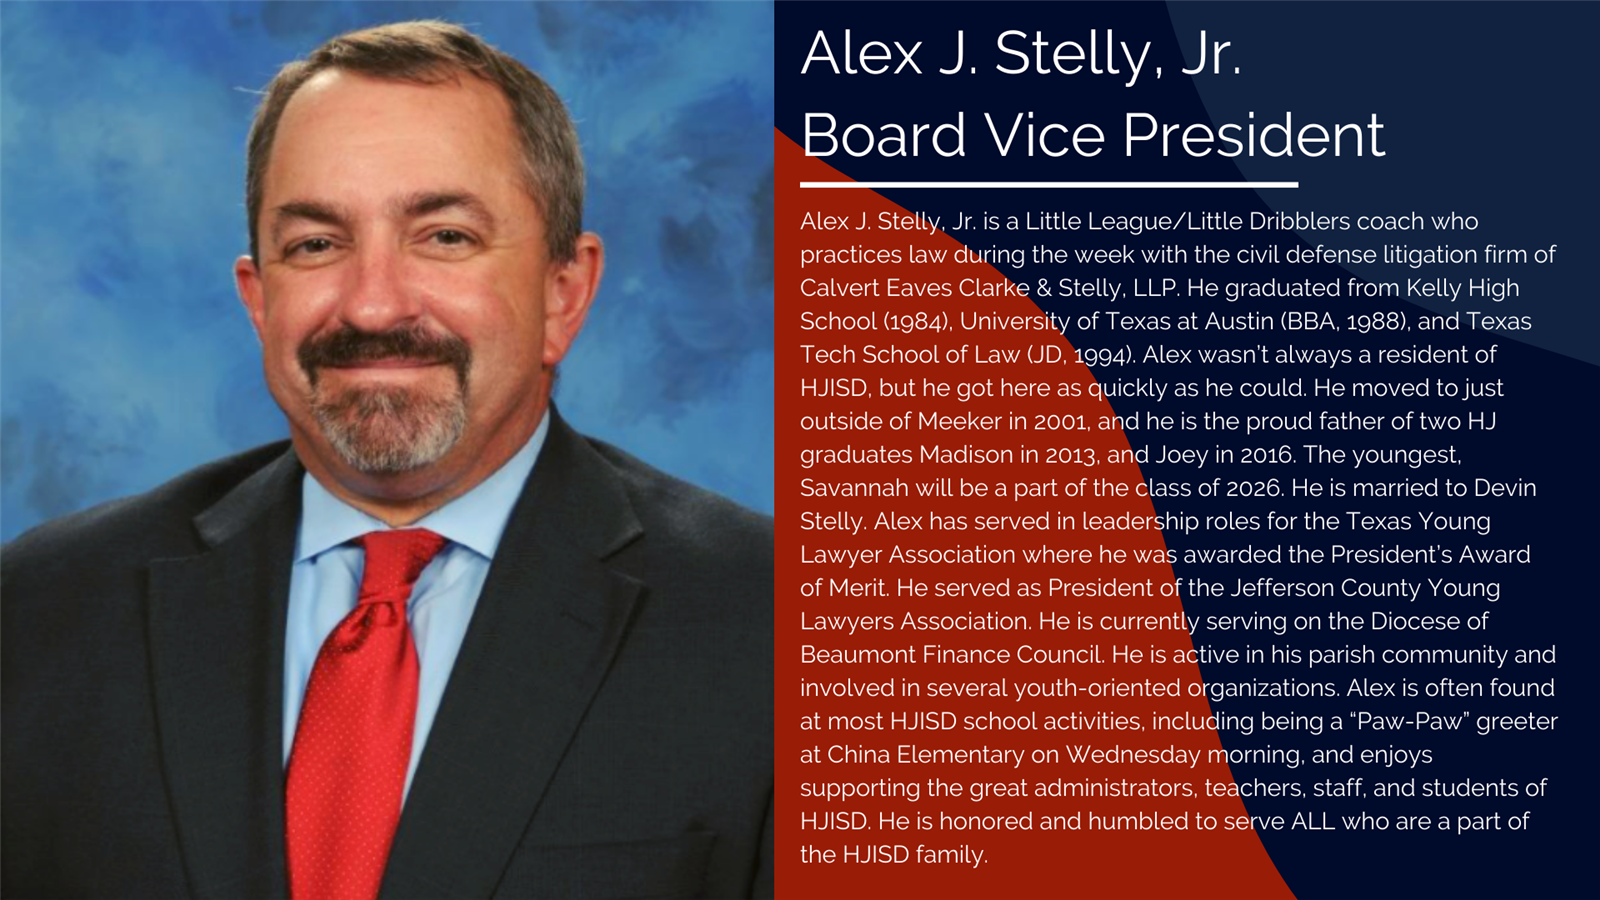 Alex J. Stelly, Jr. is a Little League/Little Dribblers coach who practices law during the week with the civil defense litiga